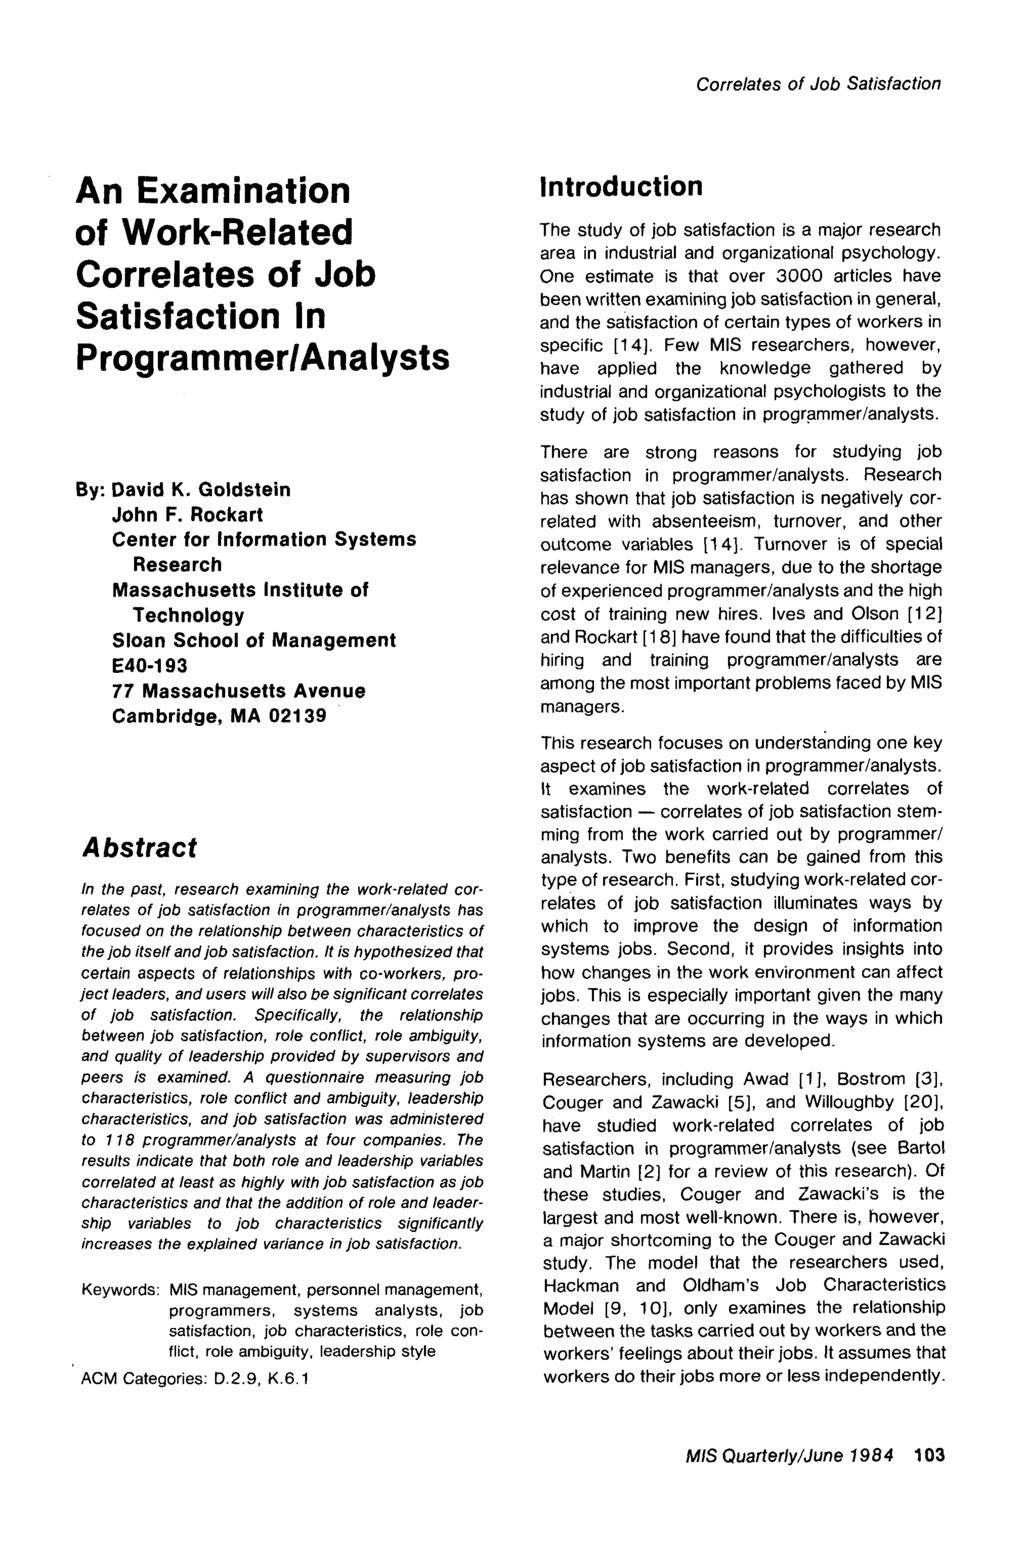 An Examination of Work-Related Correlates of Job Satisfaction In Programmer/Analysts By: David K.